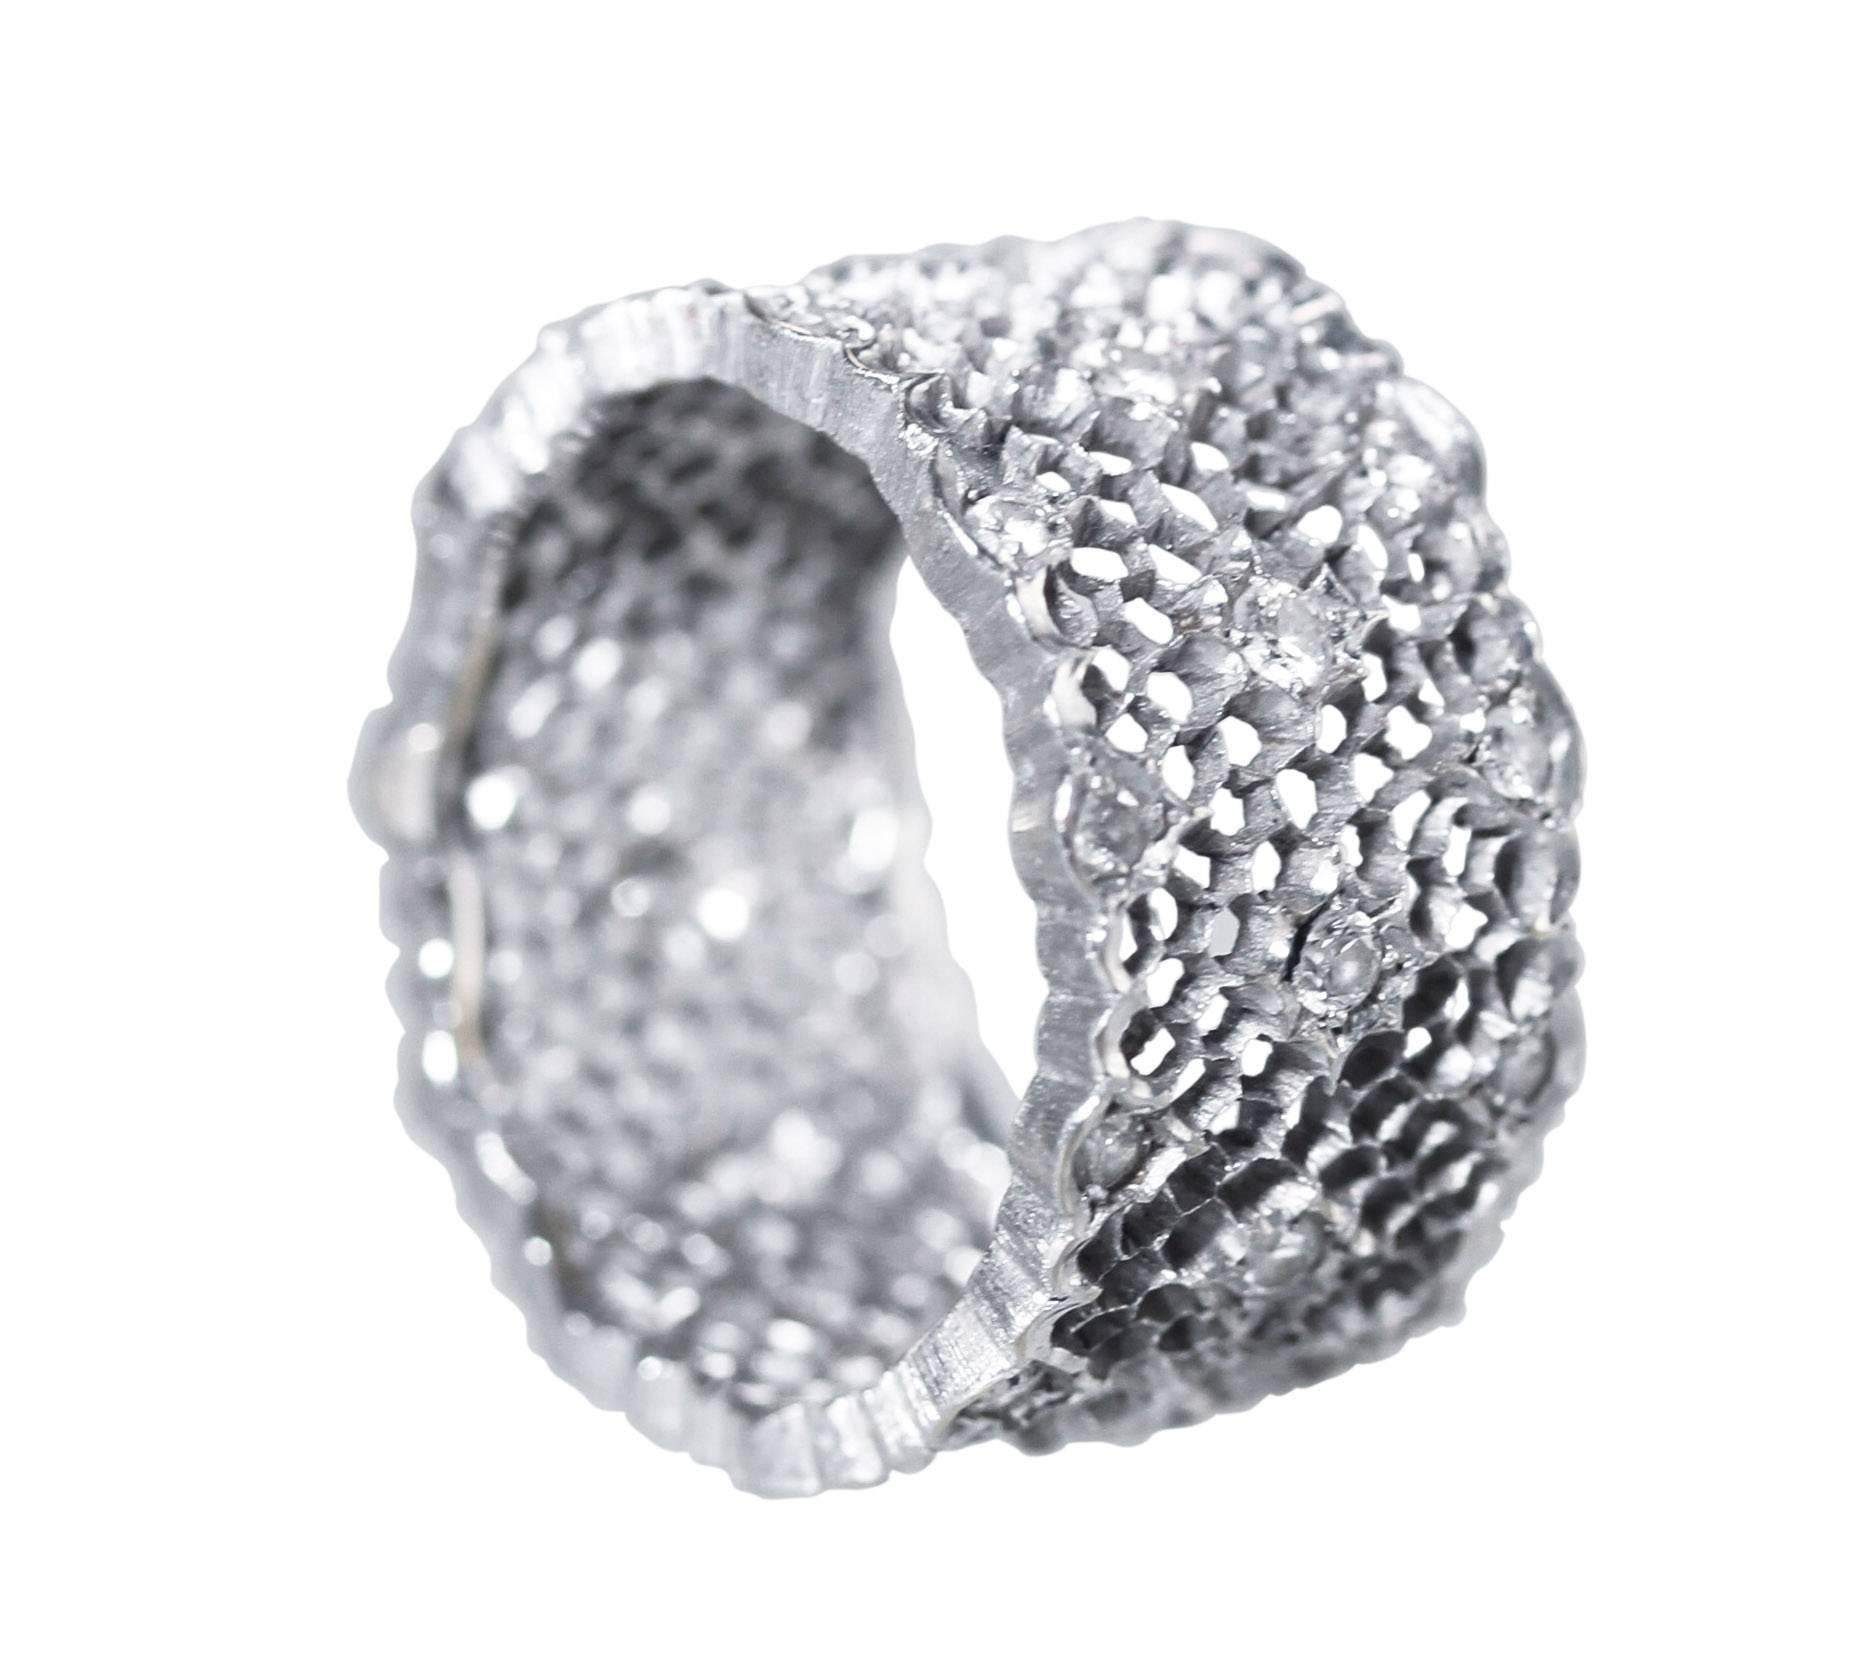 An 18 karat white gold and diamond 'Tulle Broccato' ring by Buccellati, Italy, of openwork design set throughout with 33 round diamonds weighing approximately 0.75 carat, measuring 3/8 by 3/4 by 3/4, finger size 6 1/4, gross weight 5.1 grams, signed